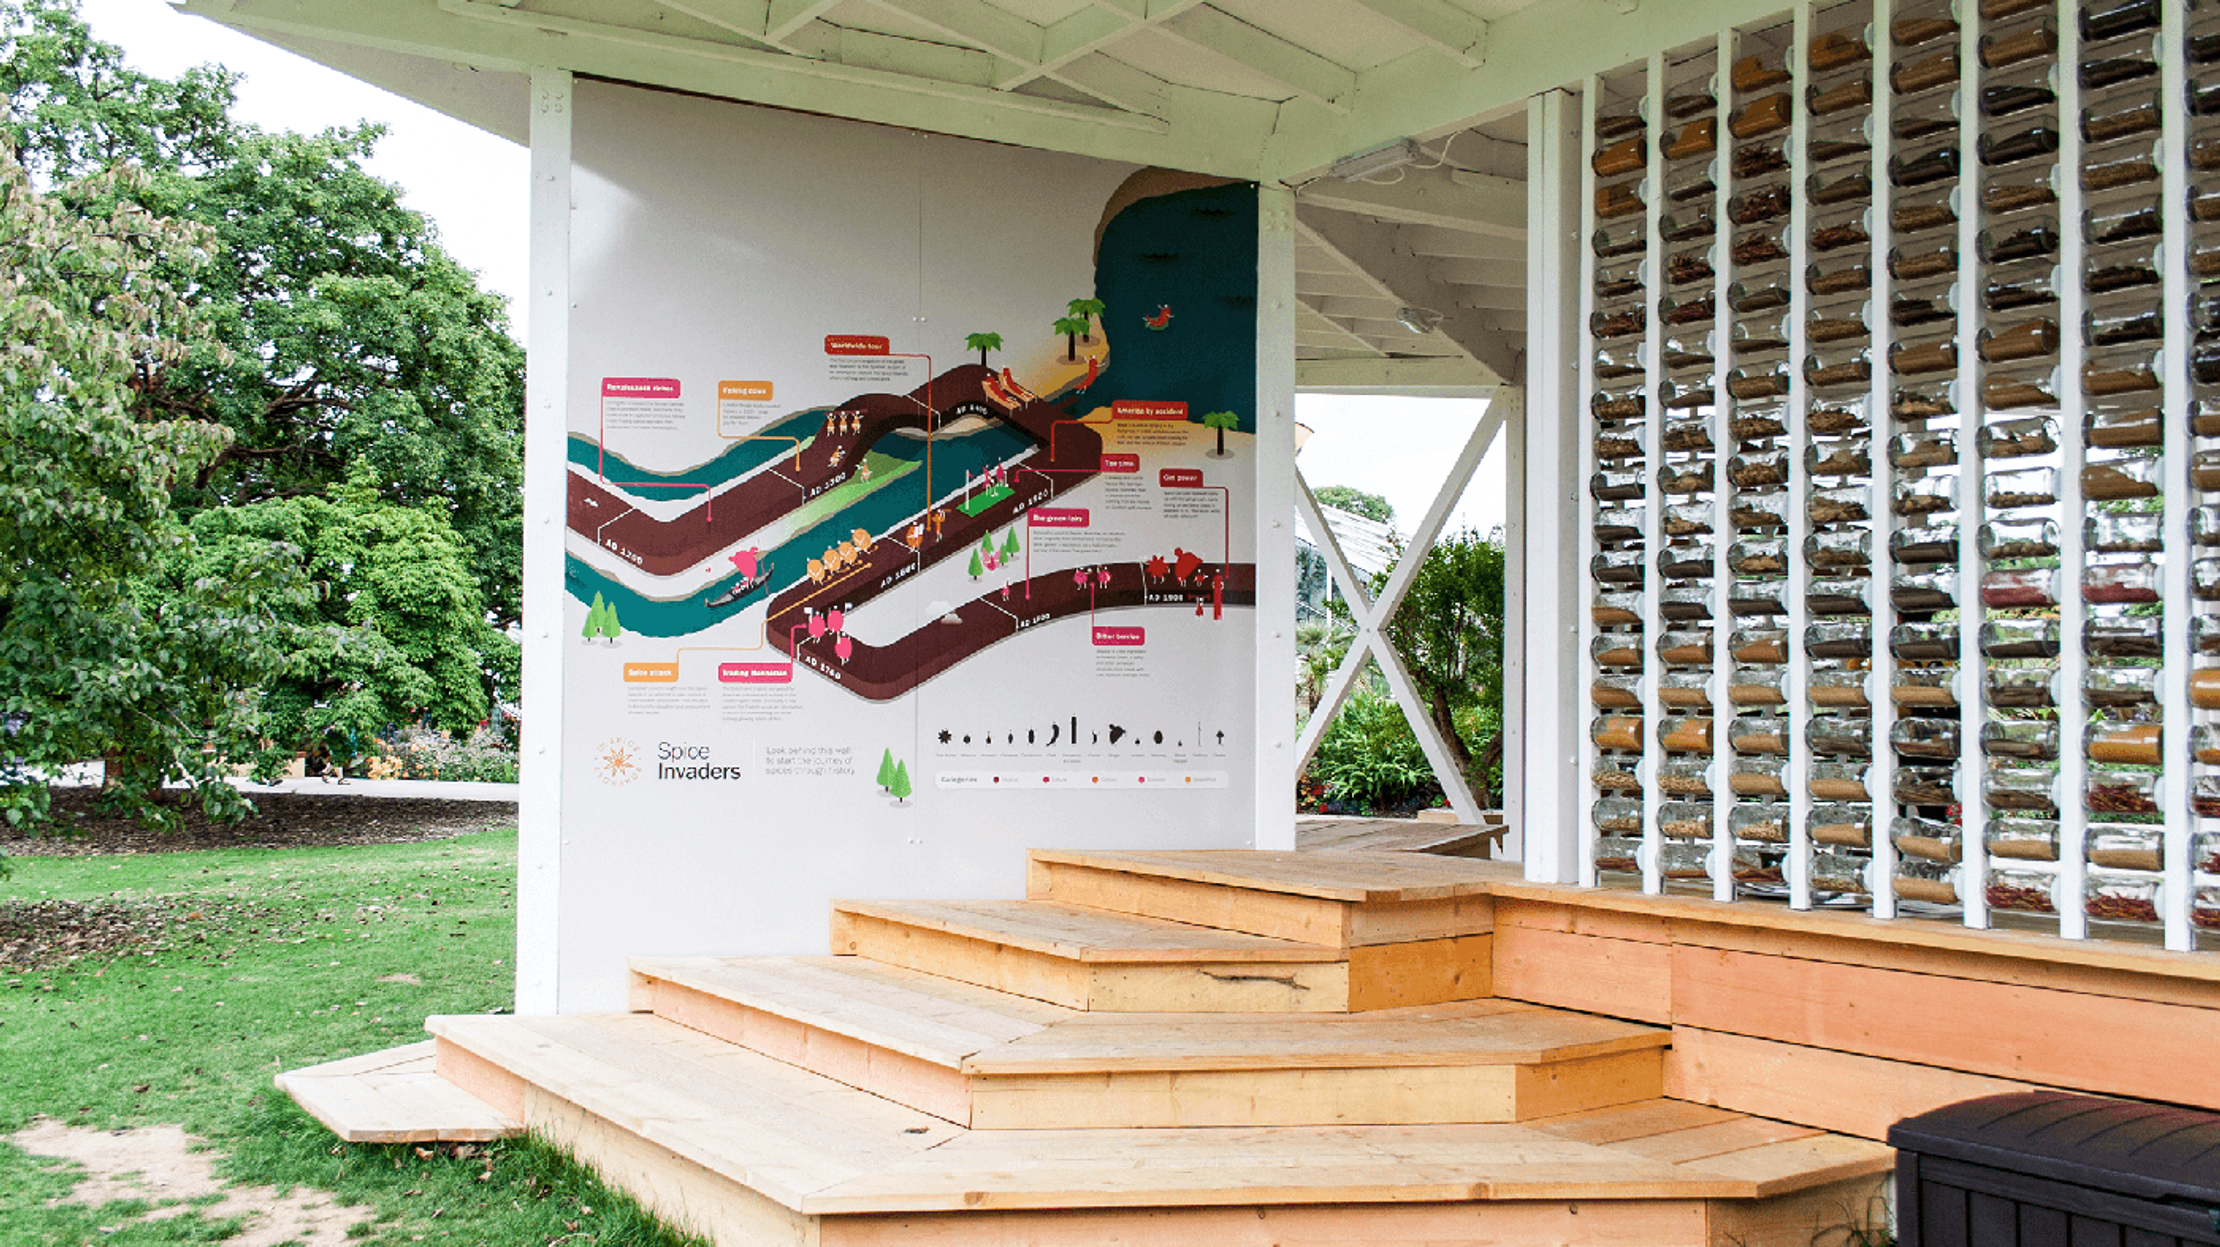 An illustrated timeline of the history of spices displayed on the wall of an outdoors structure in Kew Gardens. 